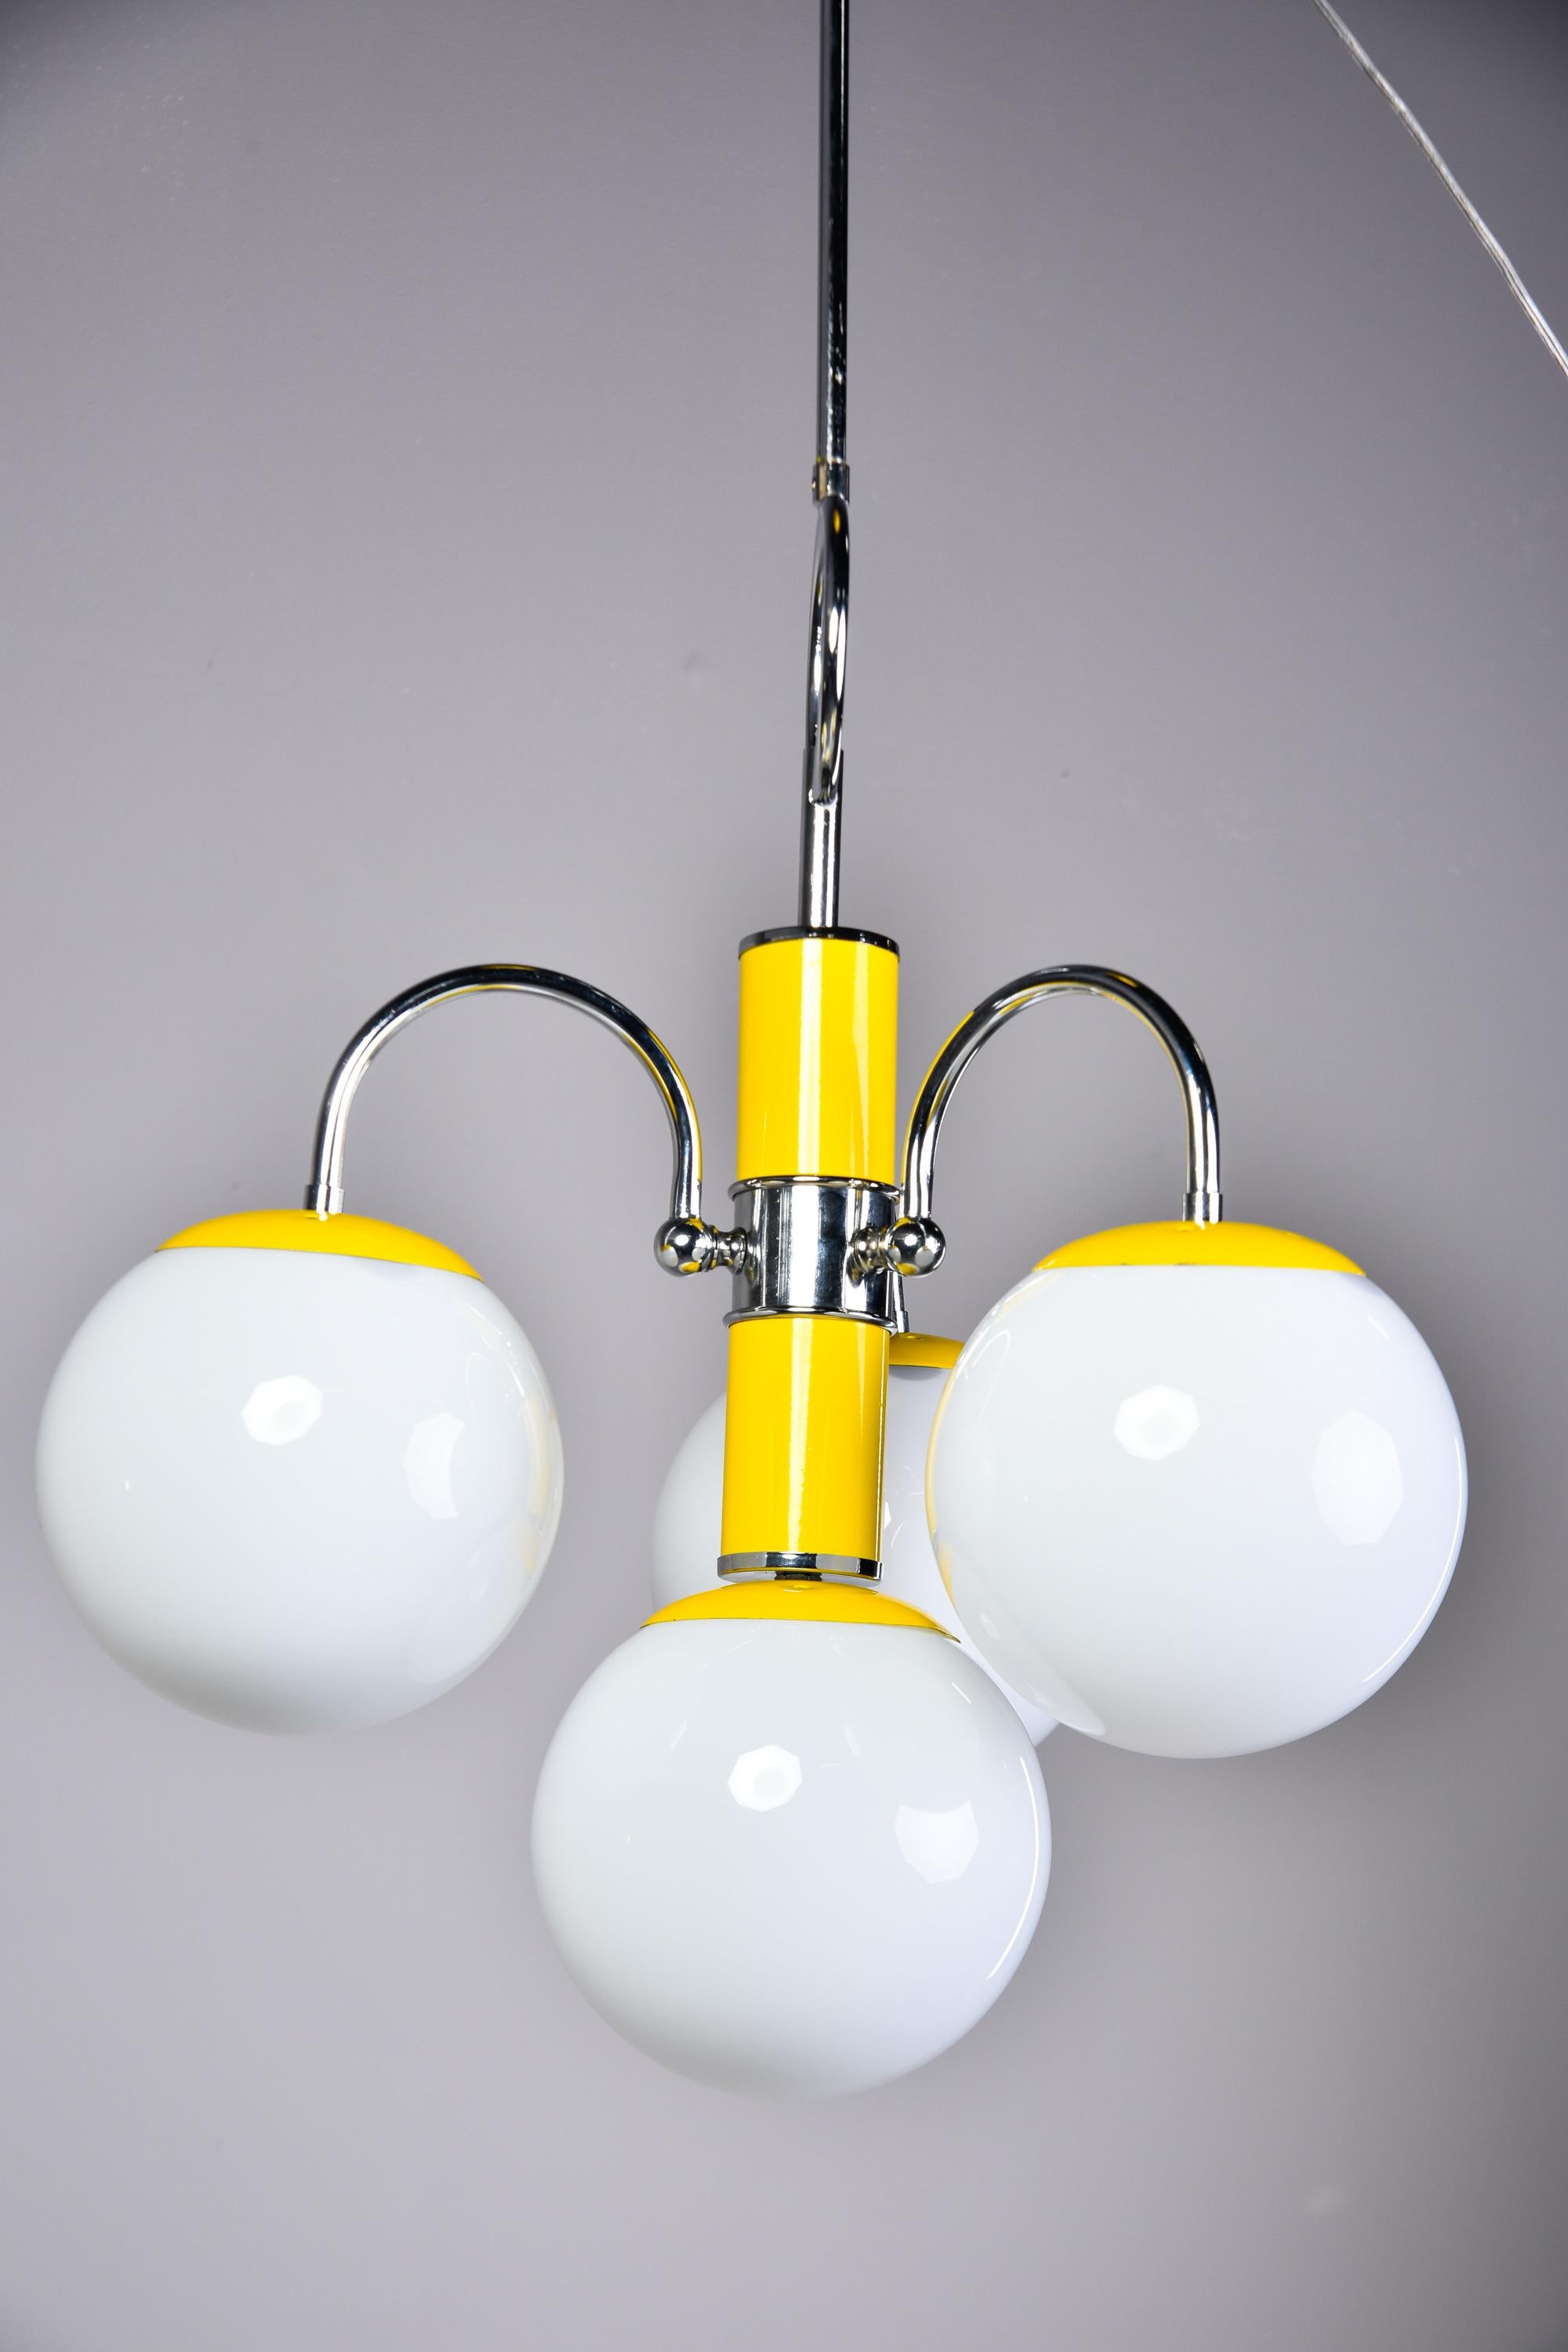 Midcentury Italian Chrome and Yellow Four Light Fixture For Sale 2